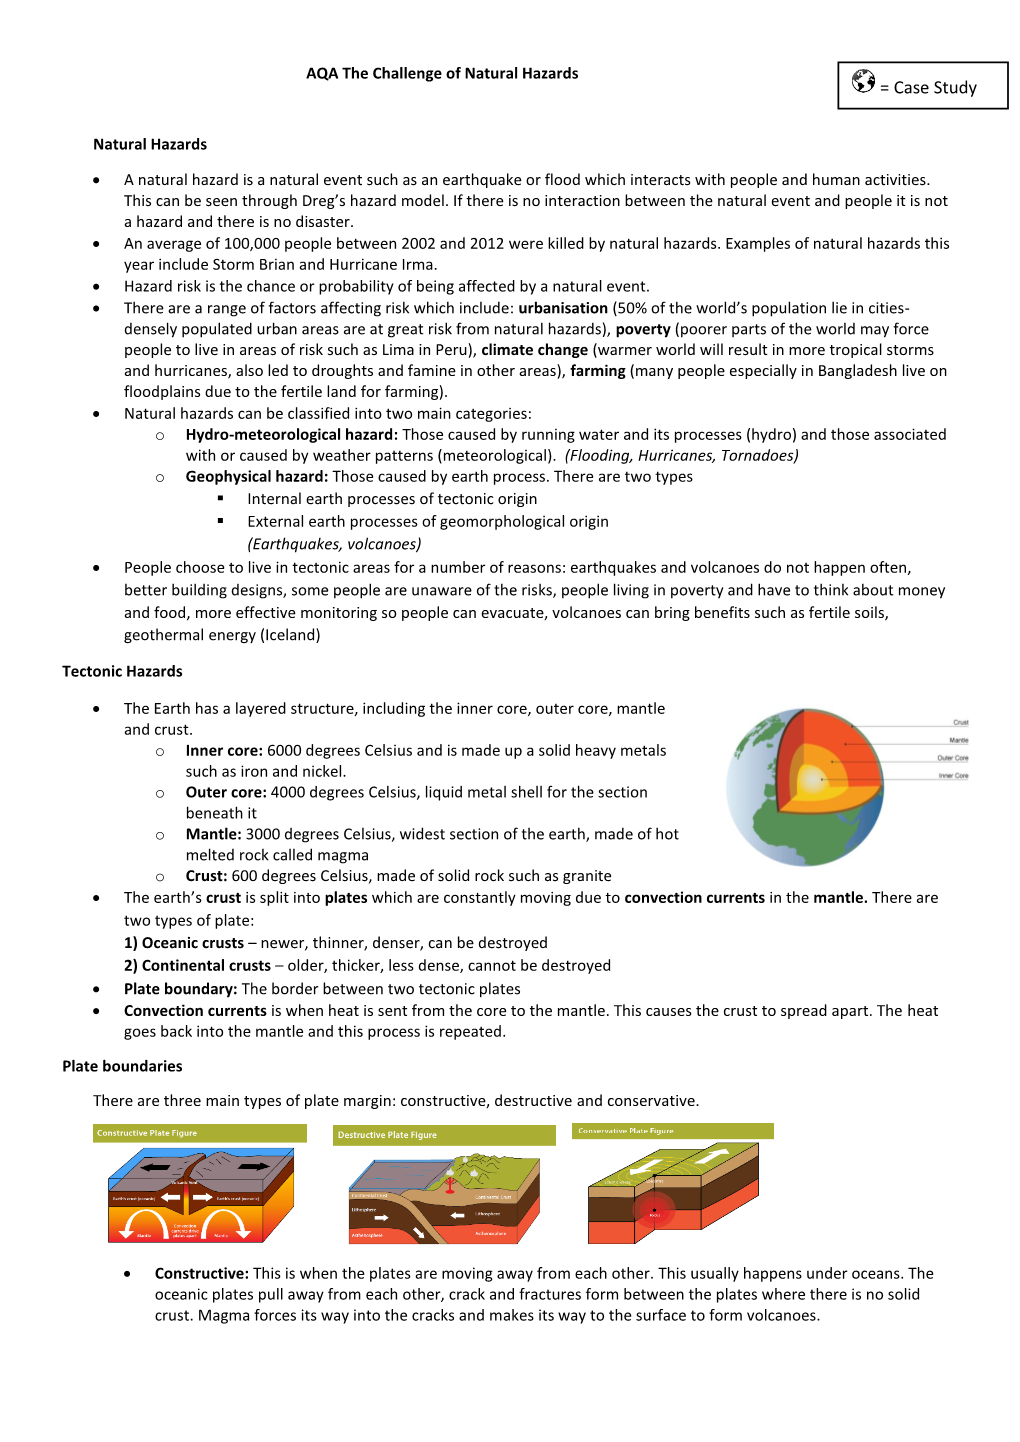 The Challenge of Natural Hazards Revision Guide